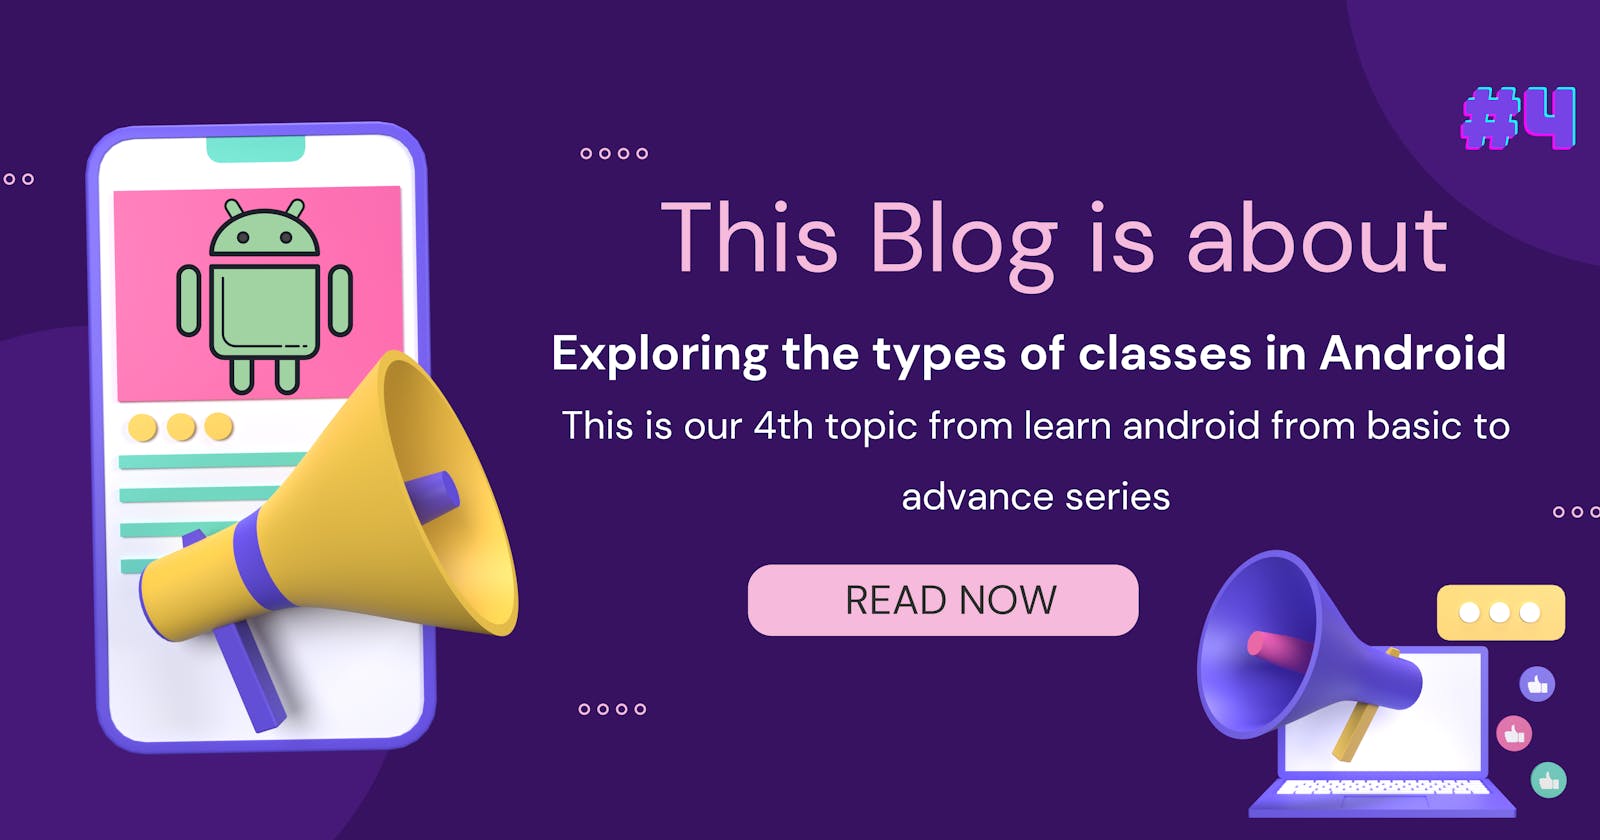 Topic: 4 Exploring the types of classes in Android